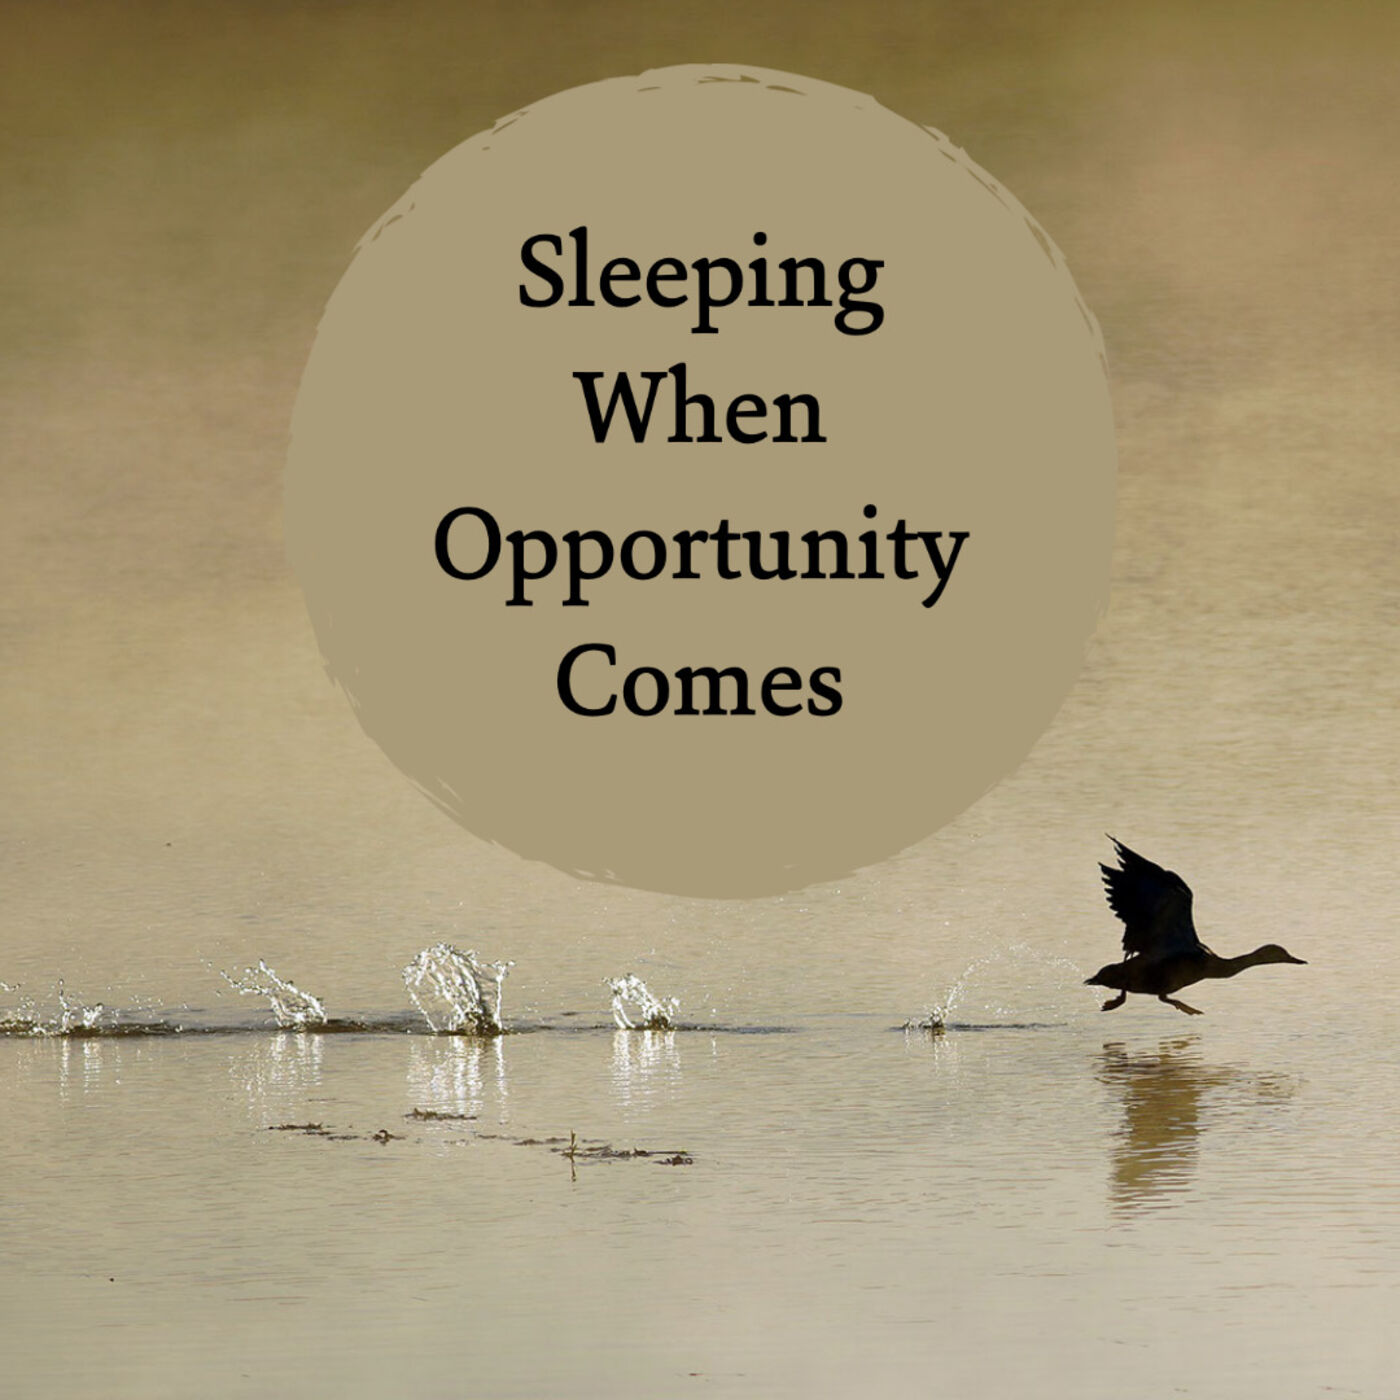 Sleeping When Opportunity Comes